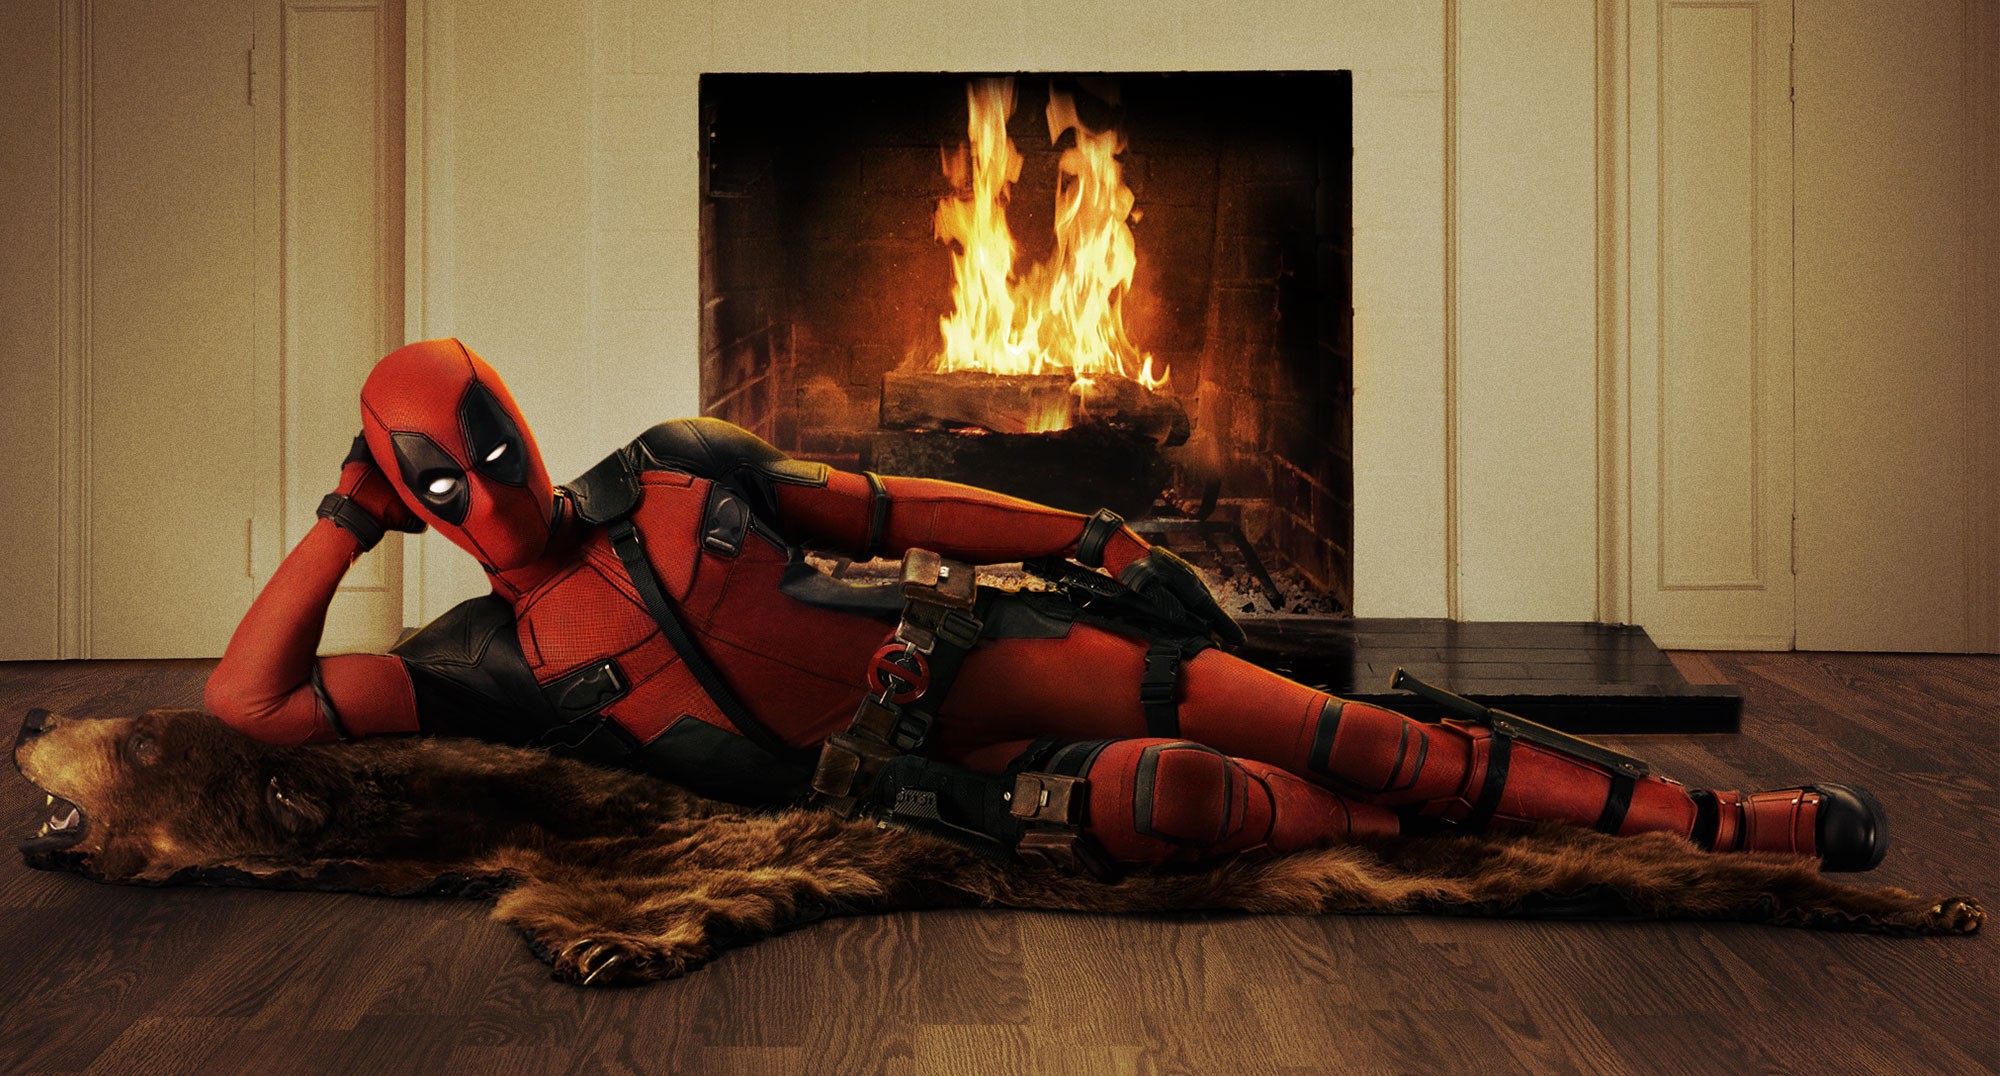 ‘deadpool’: the “merc with a mouth” returns to the big screen